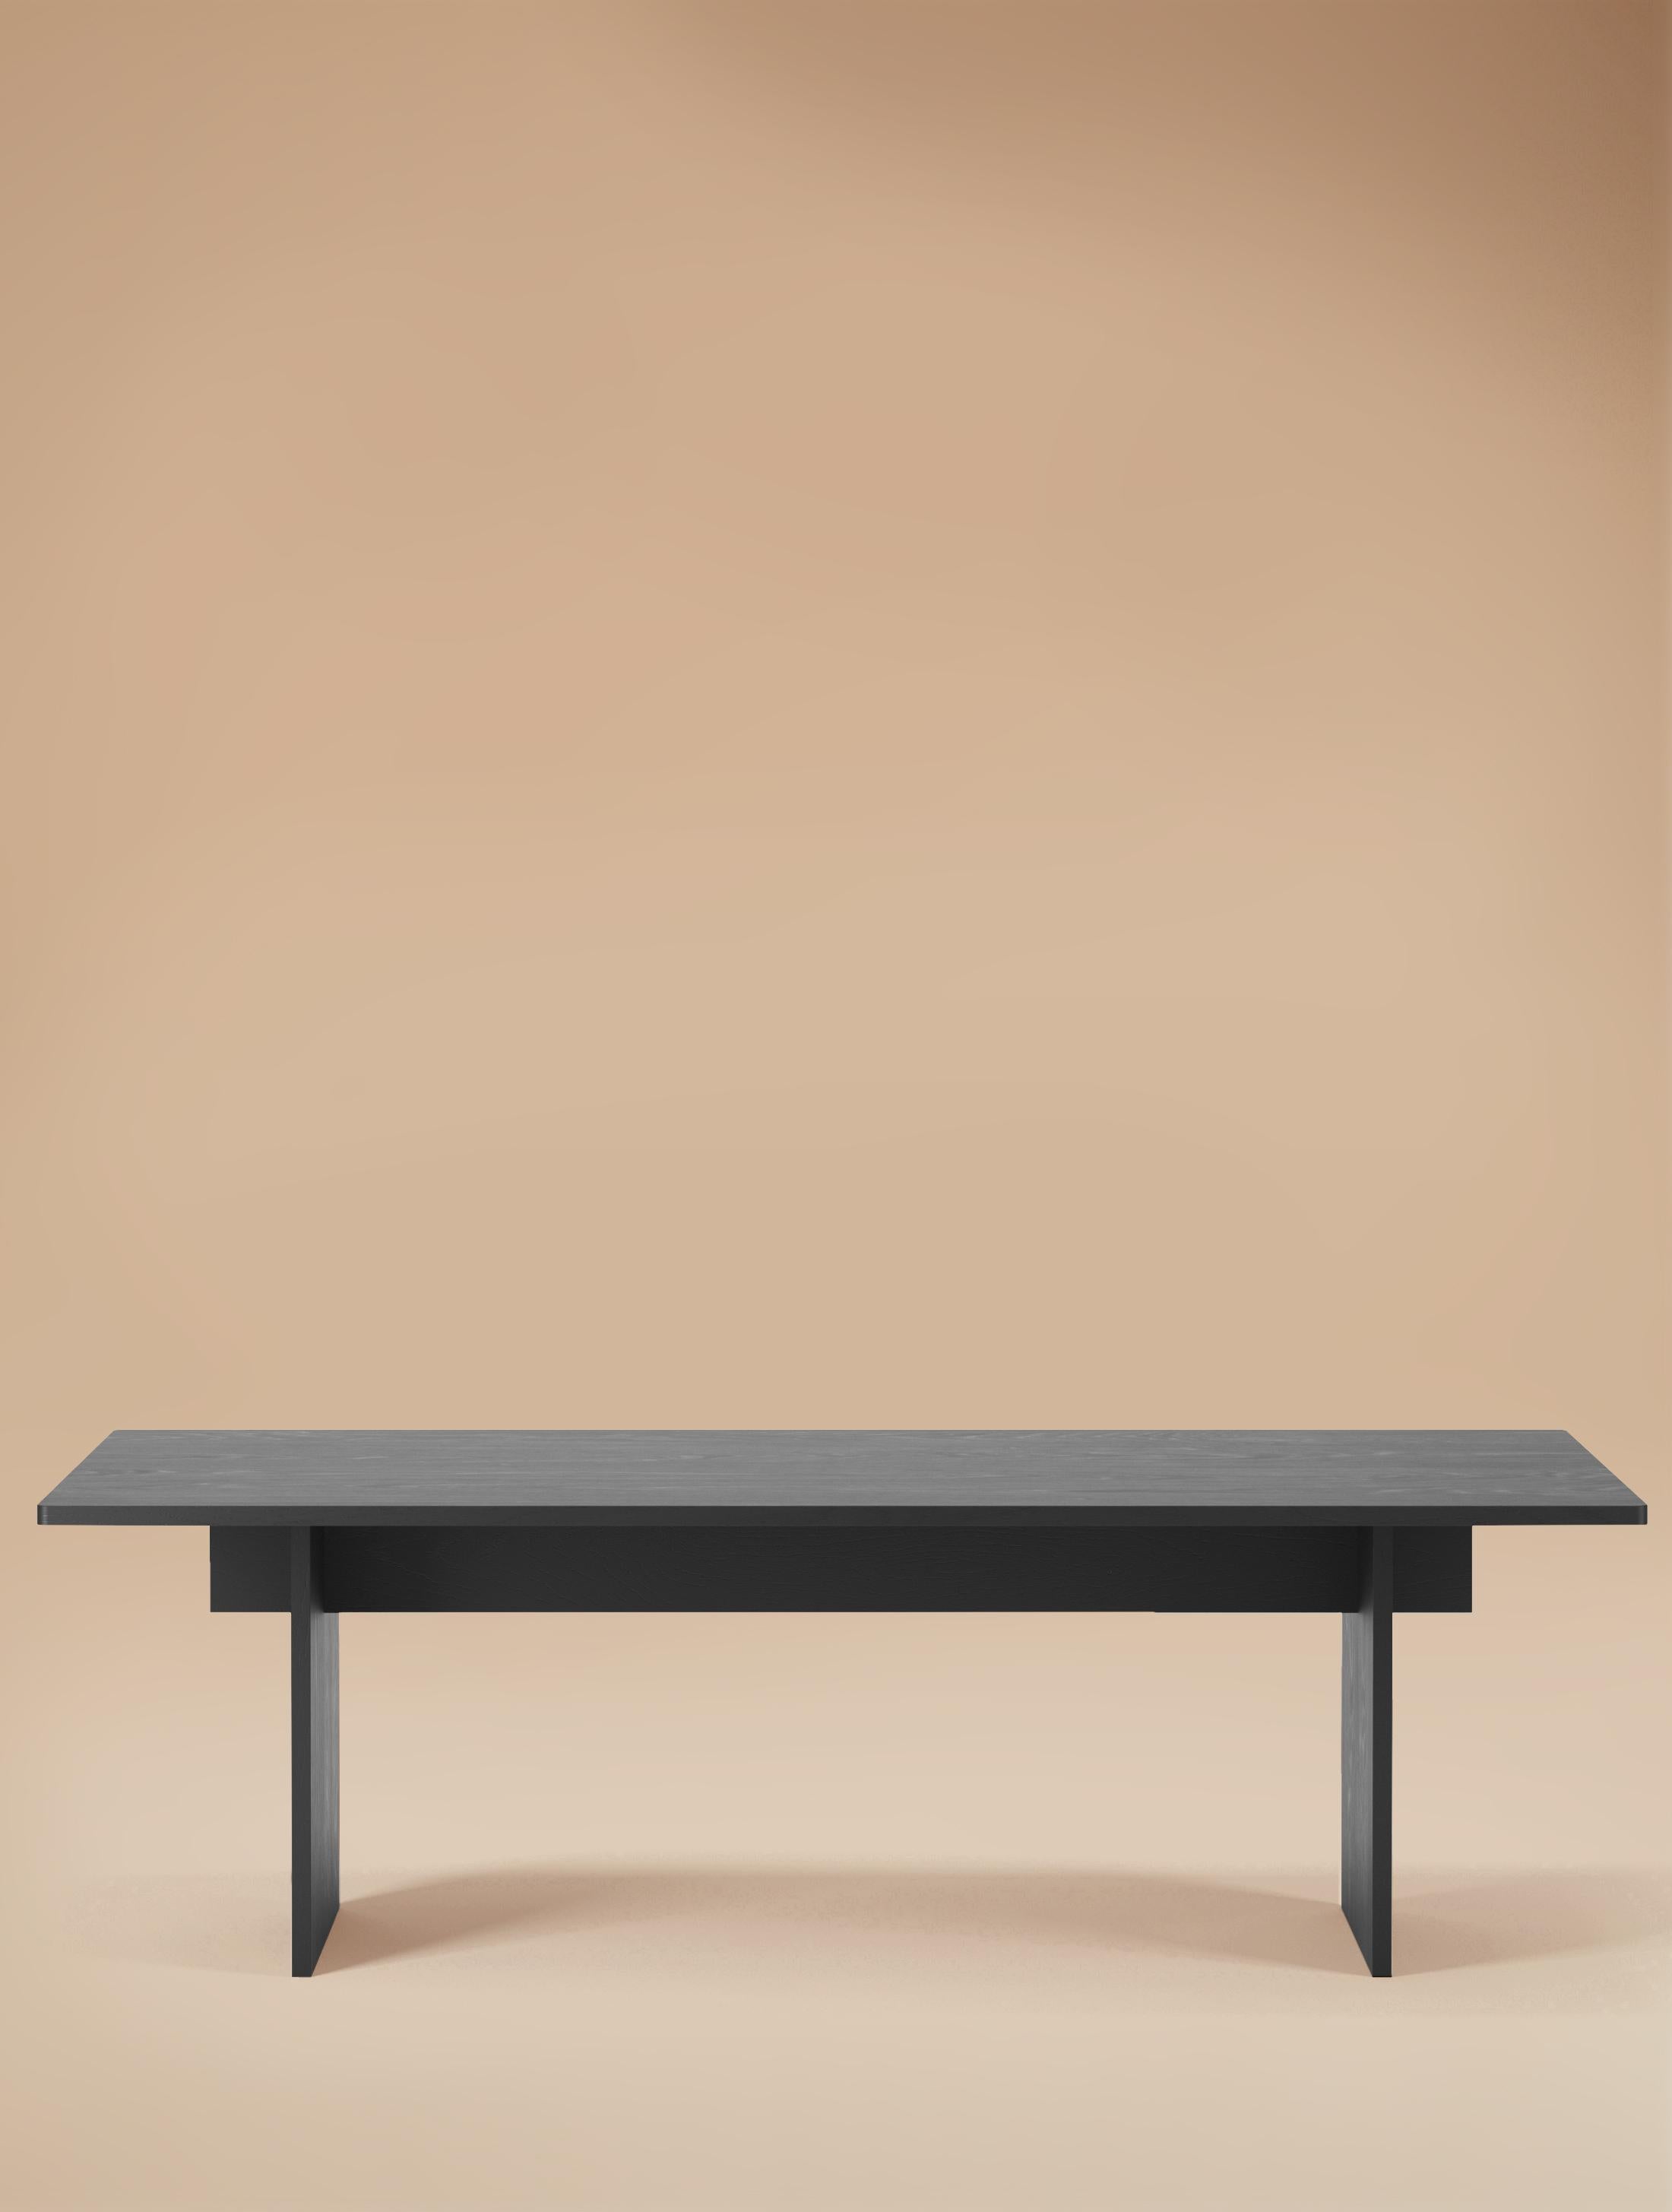 6 Seater Faure Faure Table Handcrafted in Charcoal Oak by Kevin Frankental  11